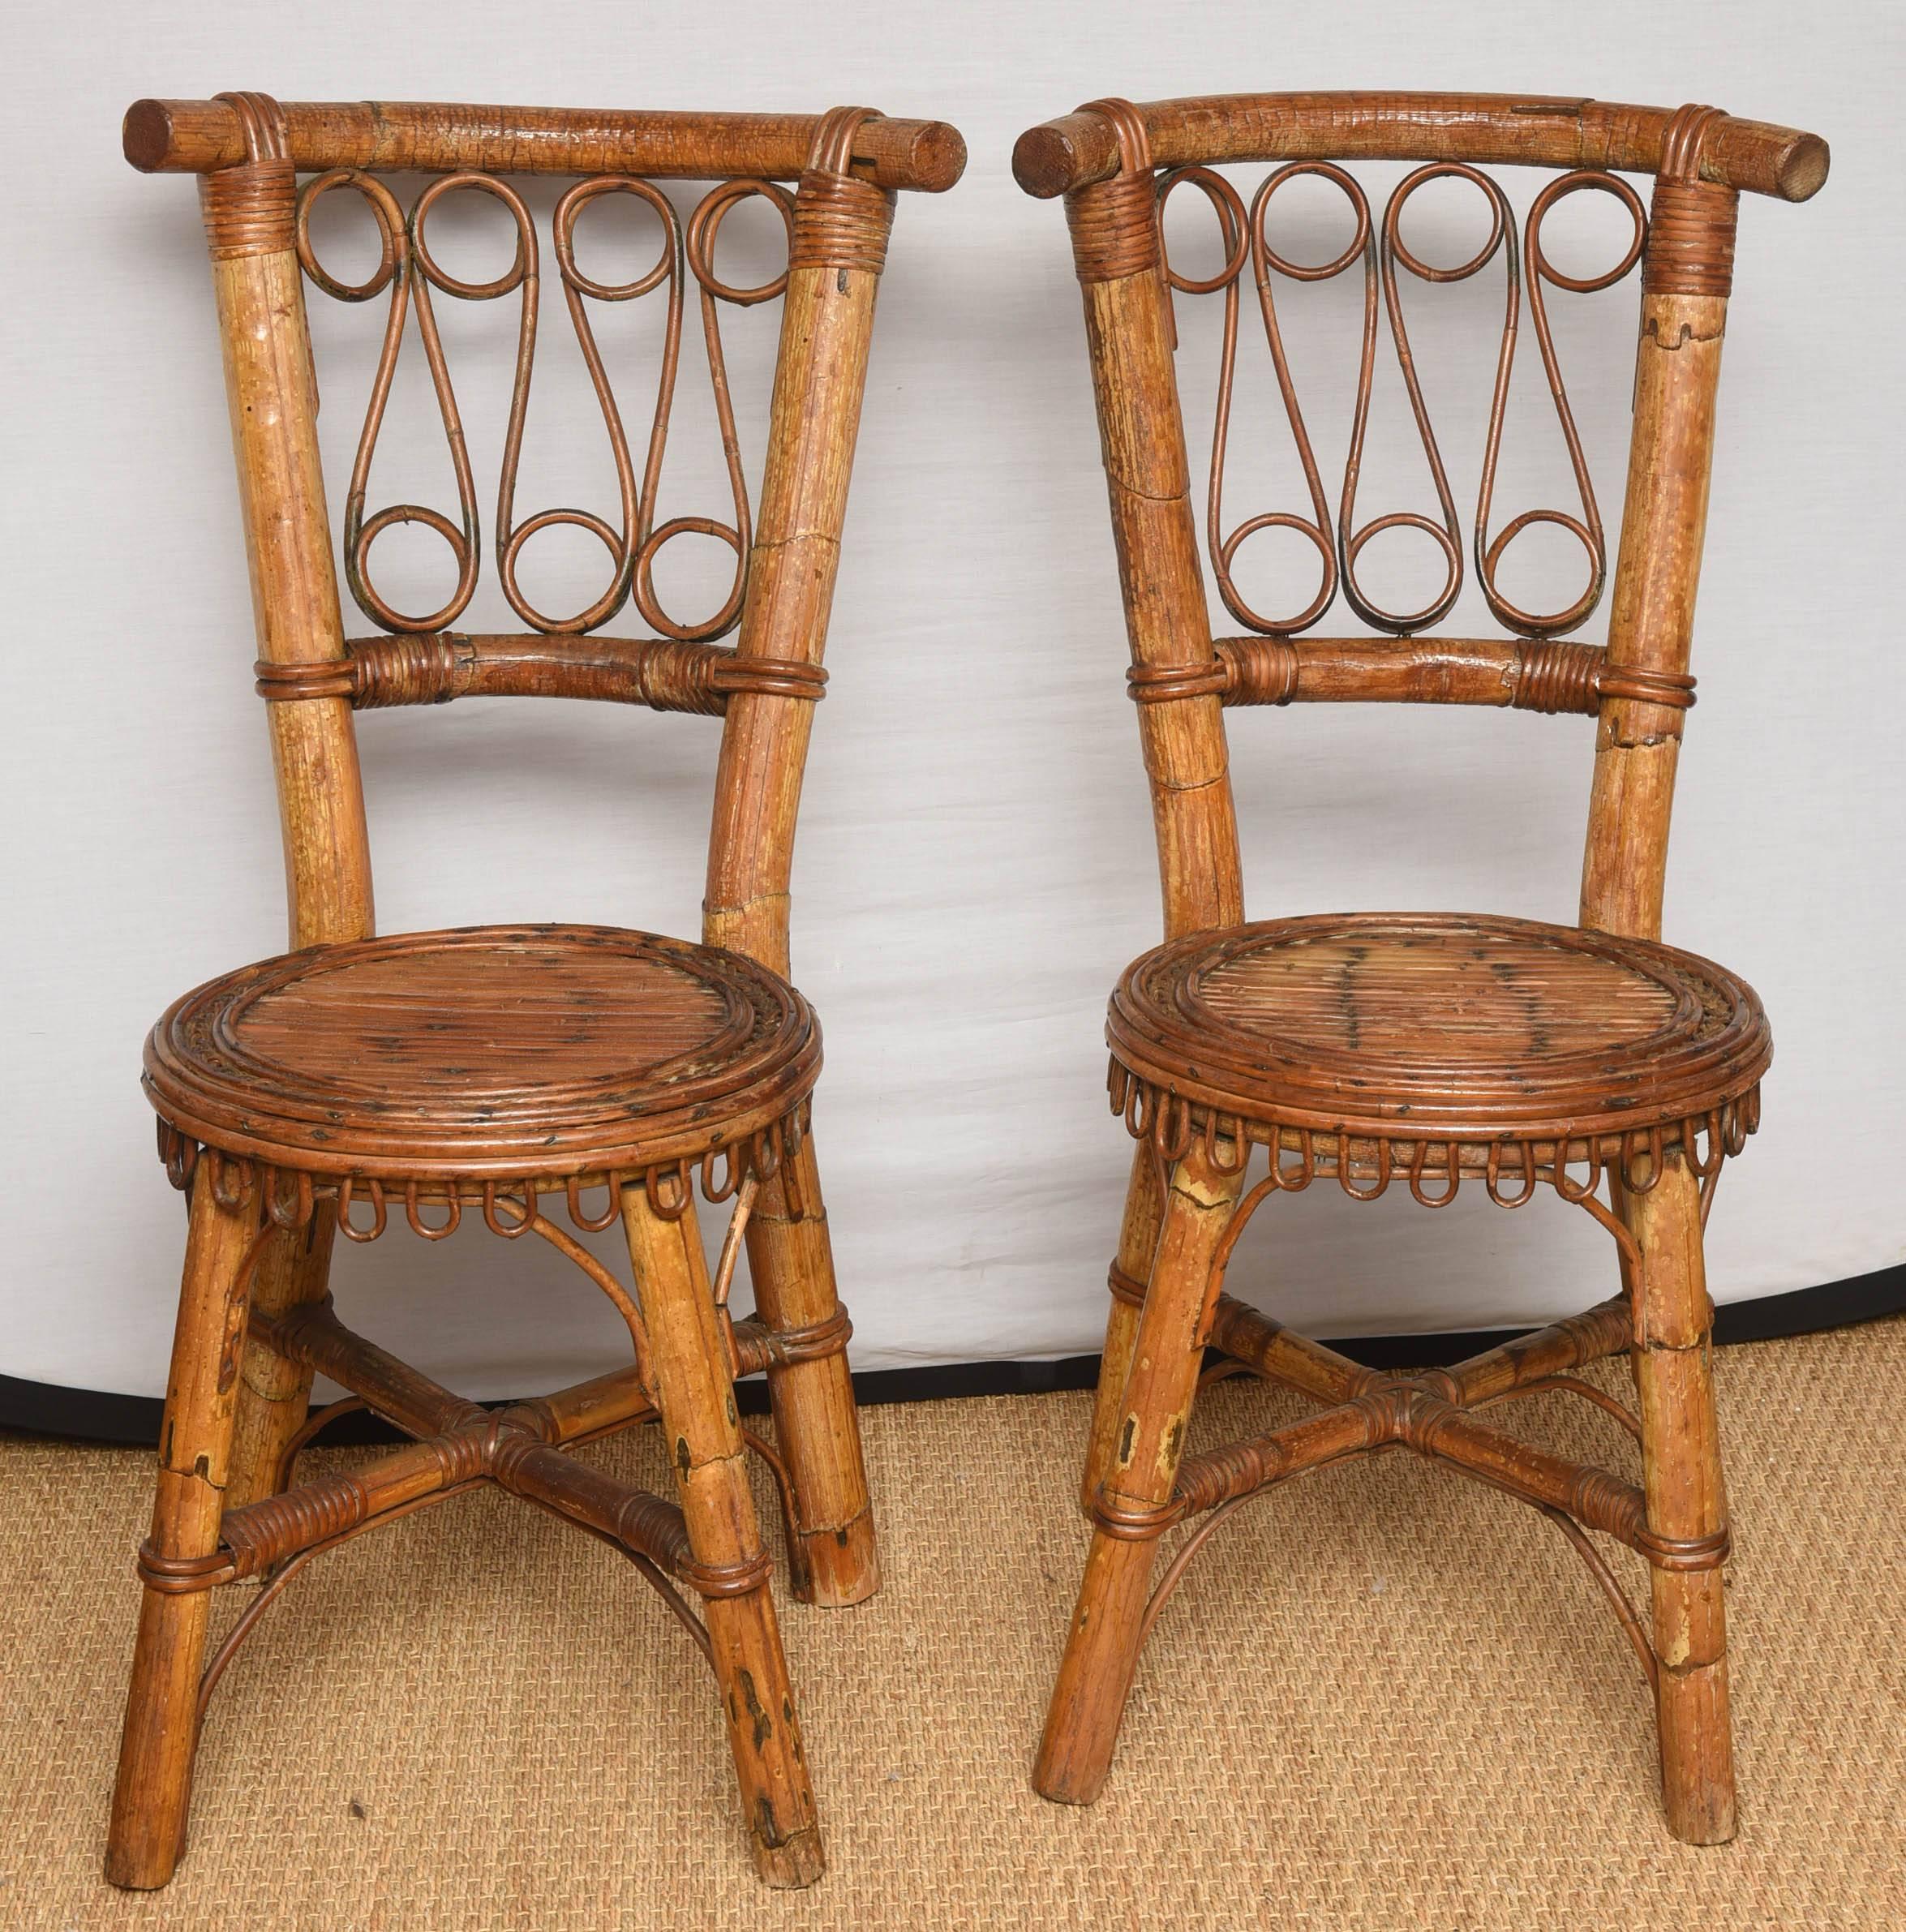 Very original Italian bamboo chairs with circular seat and plenty of details.